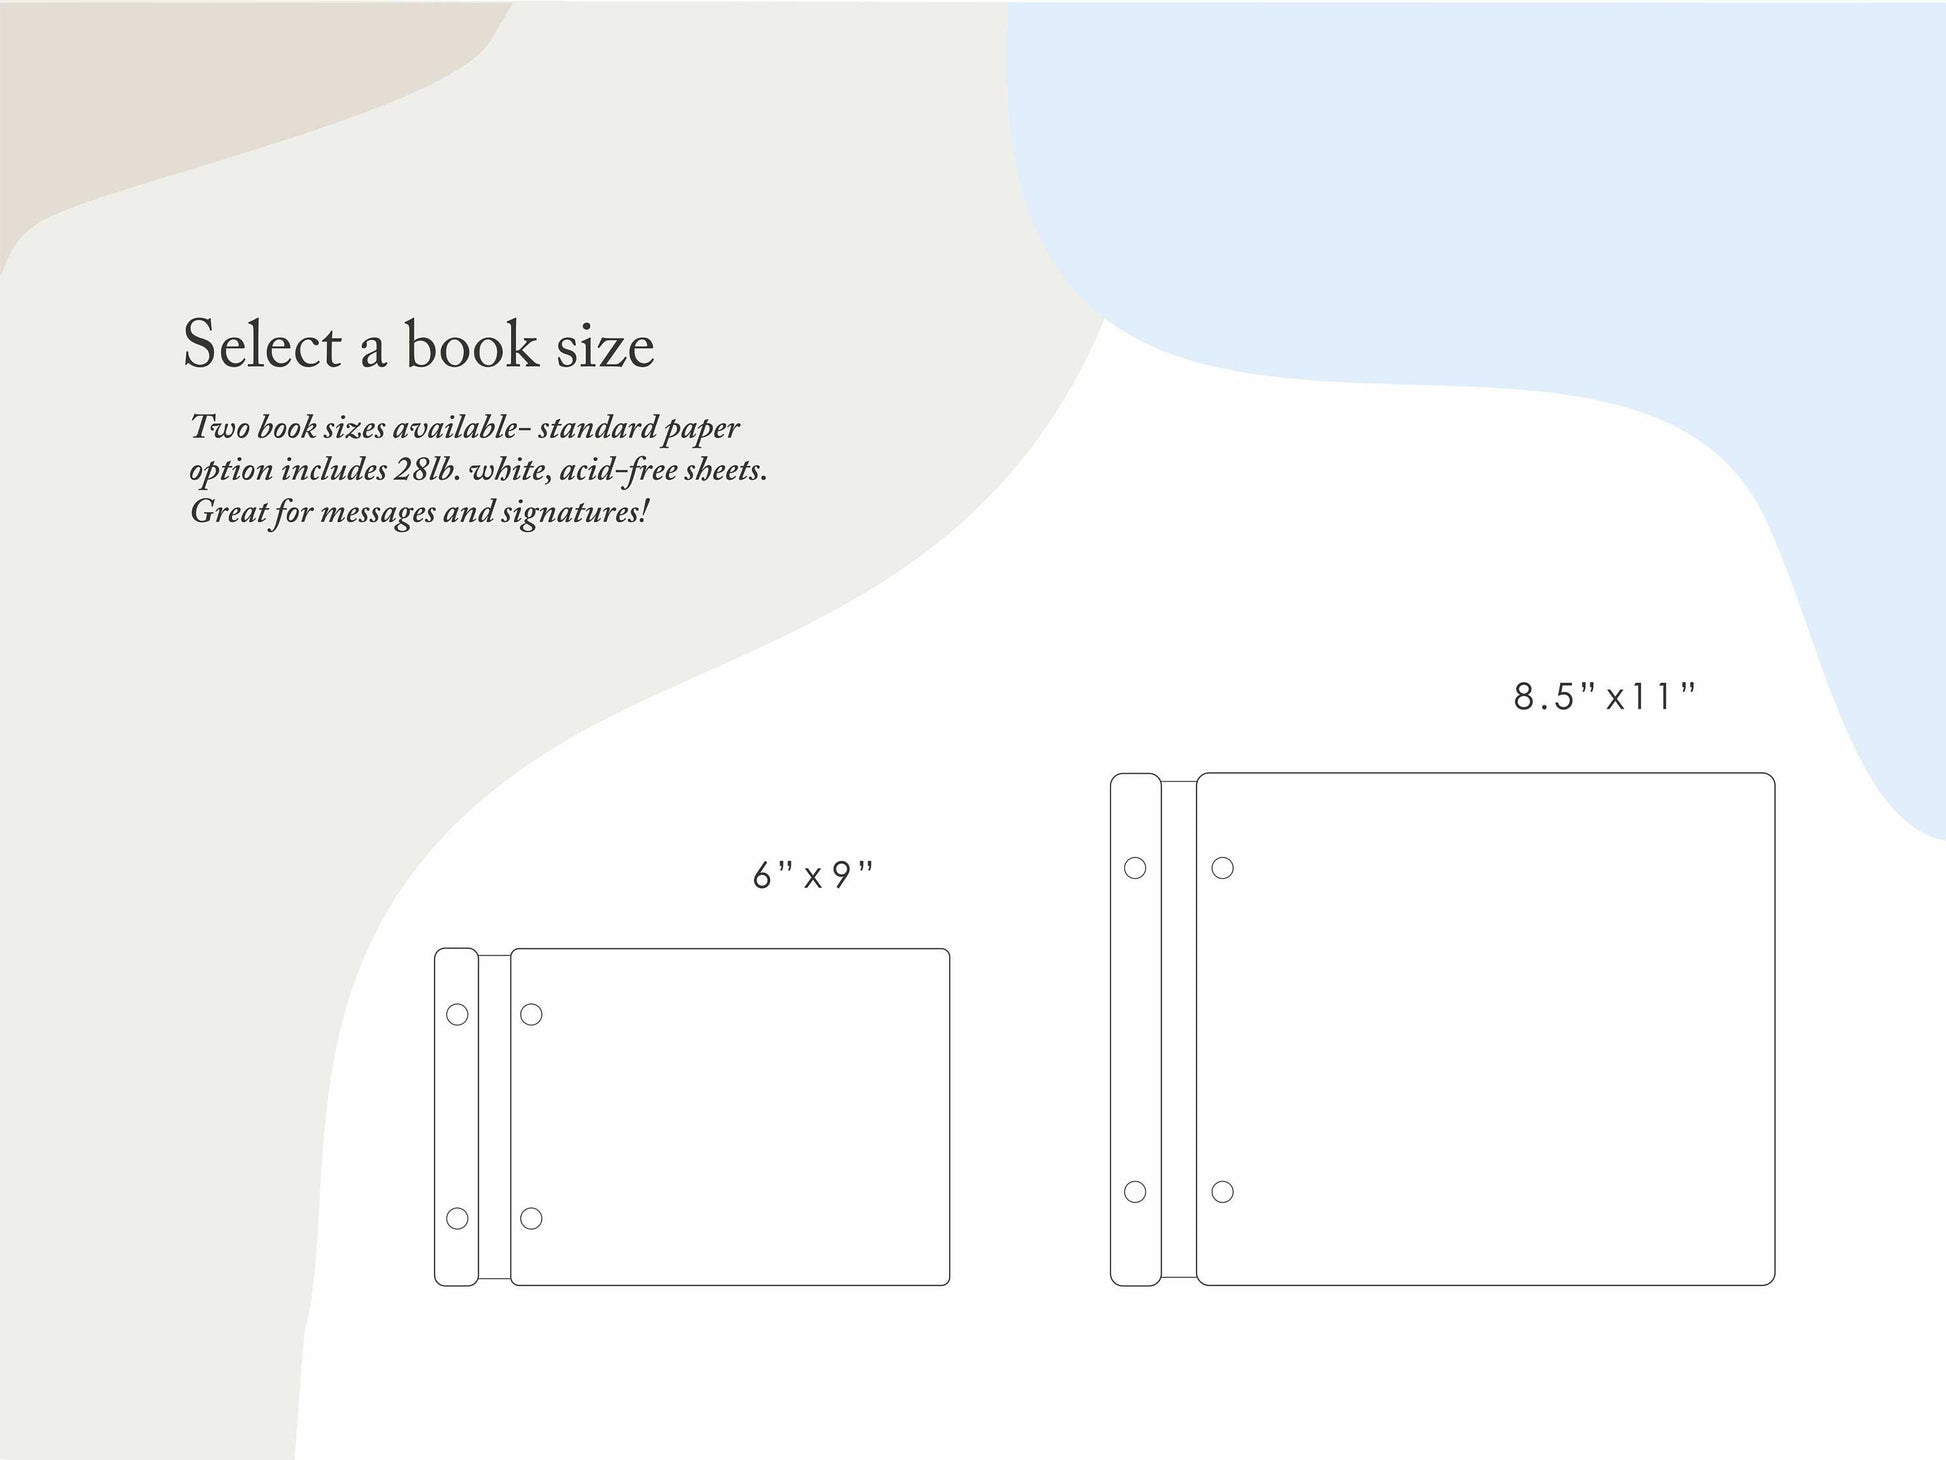 Select a book size from our two options. We have the small option that is 6x9 inches and the large option that is 8.5x11 inches. By default, our books come with standard sheets however, you can always upgrade to cardstock for photo album purposes!